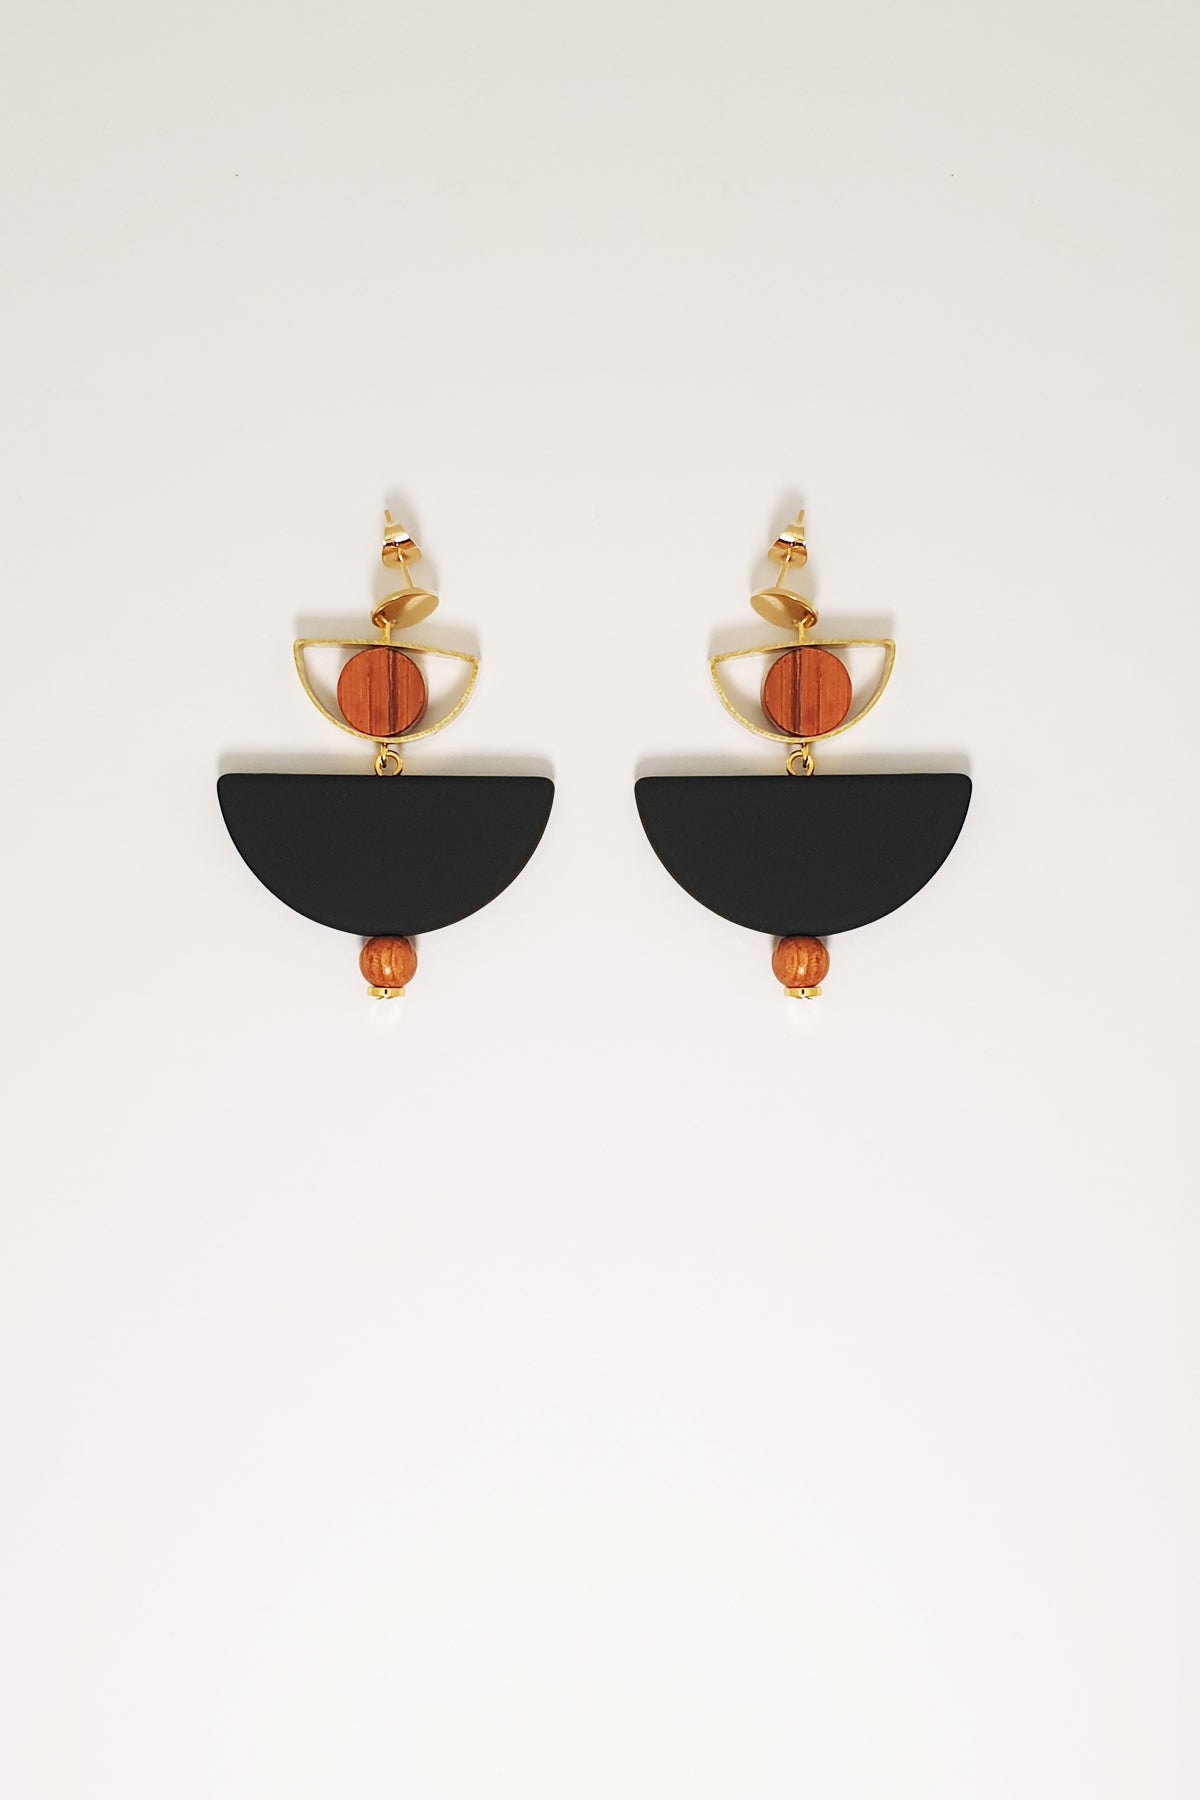 A pair of stud dangle earrings sit against a white background. They feature a  small half circle brass piece with a wooden circle bead enclosed, below this hangs a black D shape bead followed by a small wooden bead and a tiny gold bead.